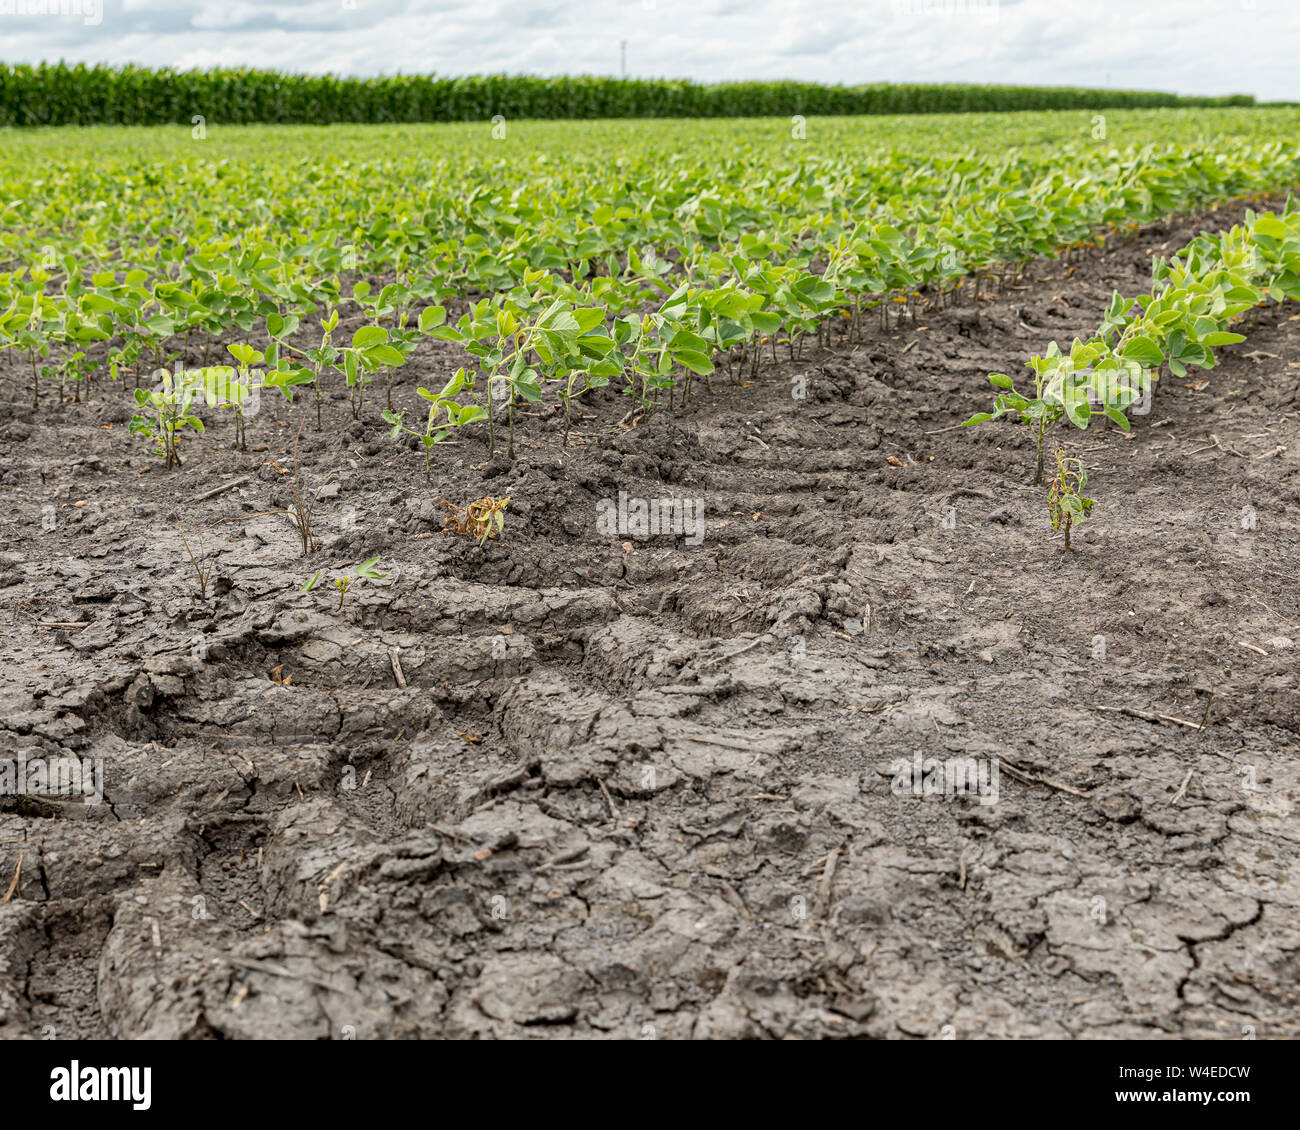 Tractor tire tread tracks, marks between rows of a soybean farm field Stock Photo